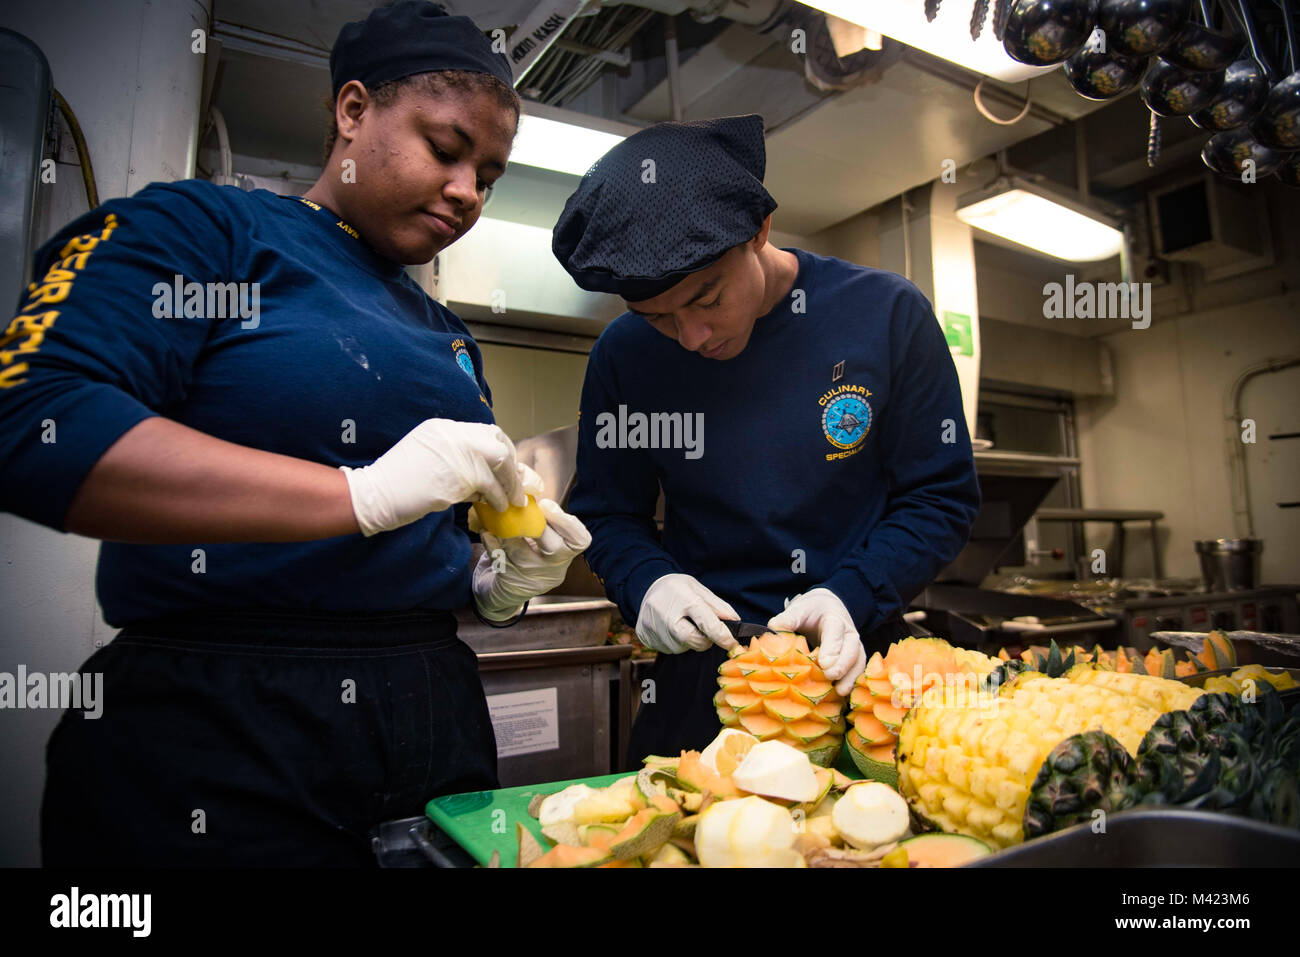 180208-N-IE397-003    PORTSMOUTH (Feb. 8, 2018) Culinary Specialist Seaman Quranna Merritt, from Philadelphia, left, and Culinary Specialist Seaman John Anthony Parocha, from San Francisco, garnish fruit in the wardroom galley aboard the aircraft carrier USS Dwight D. Eisenhower (CVN 69) (Ike). Ike is undergoing a Planned Incremental Availability (PIA) at Norfolk Naval Shipyard during the maintenance phase of the Optimized Fleet Response Plan (OFRP). (U.S. Navy photo by Mass Communication Specialist 3rd Class Christopher A. Michaels) Stock Photo